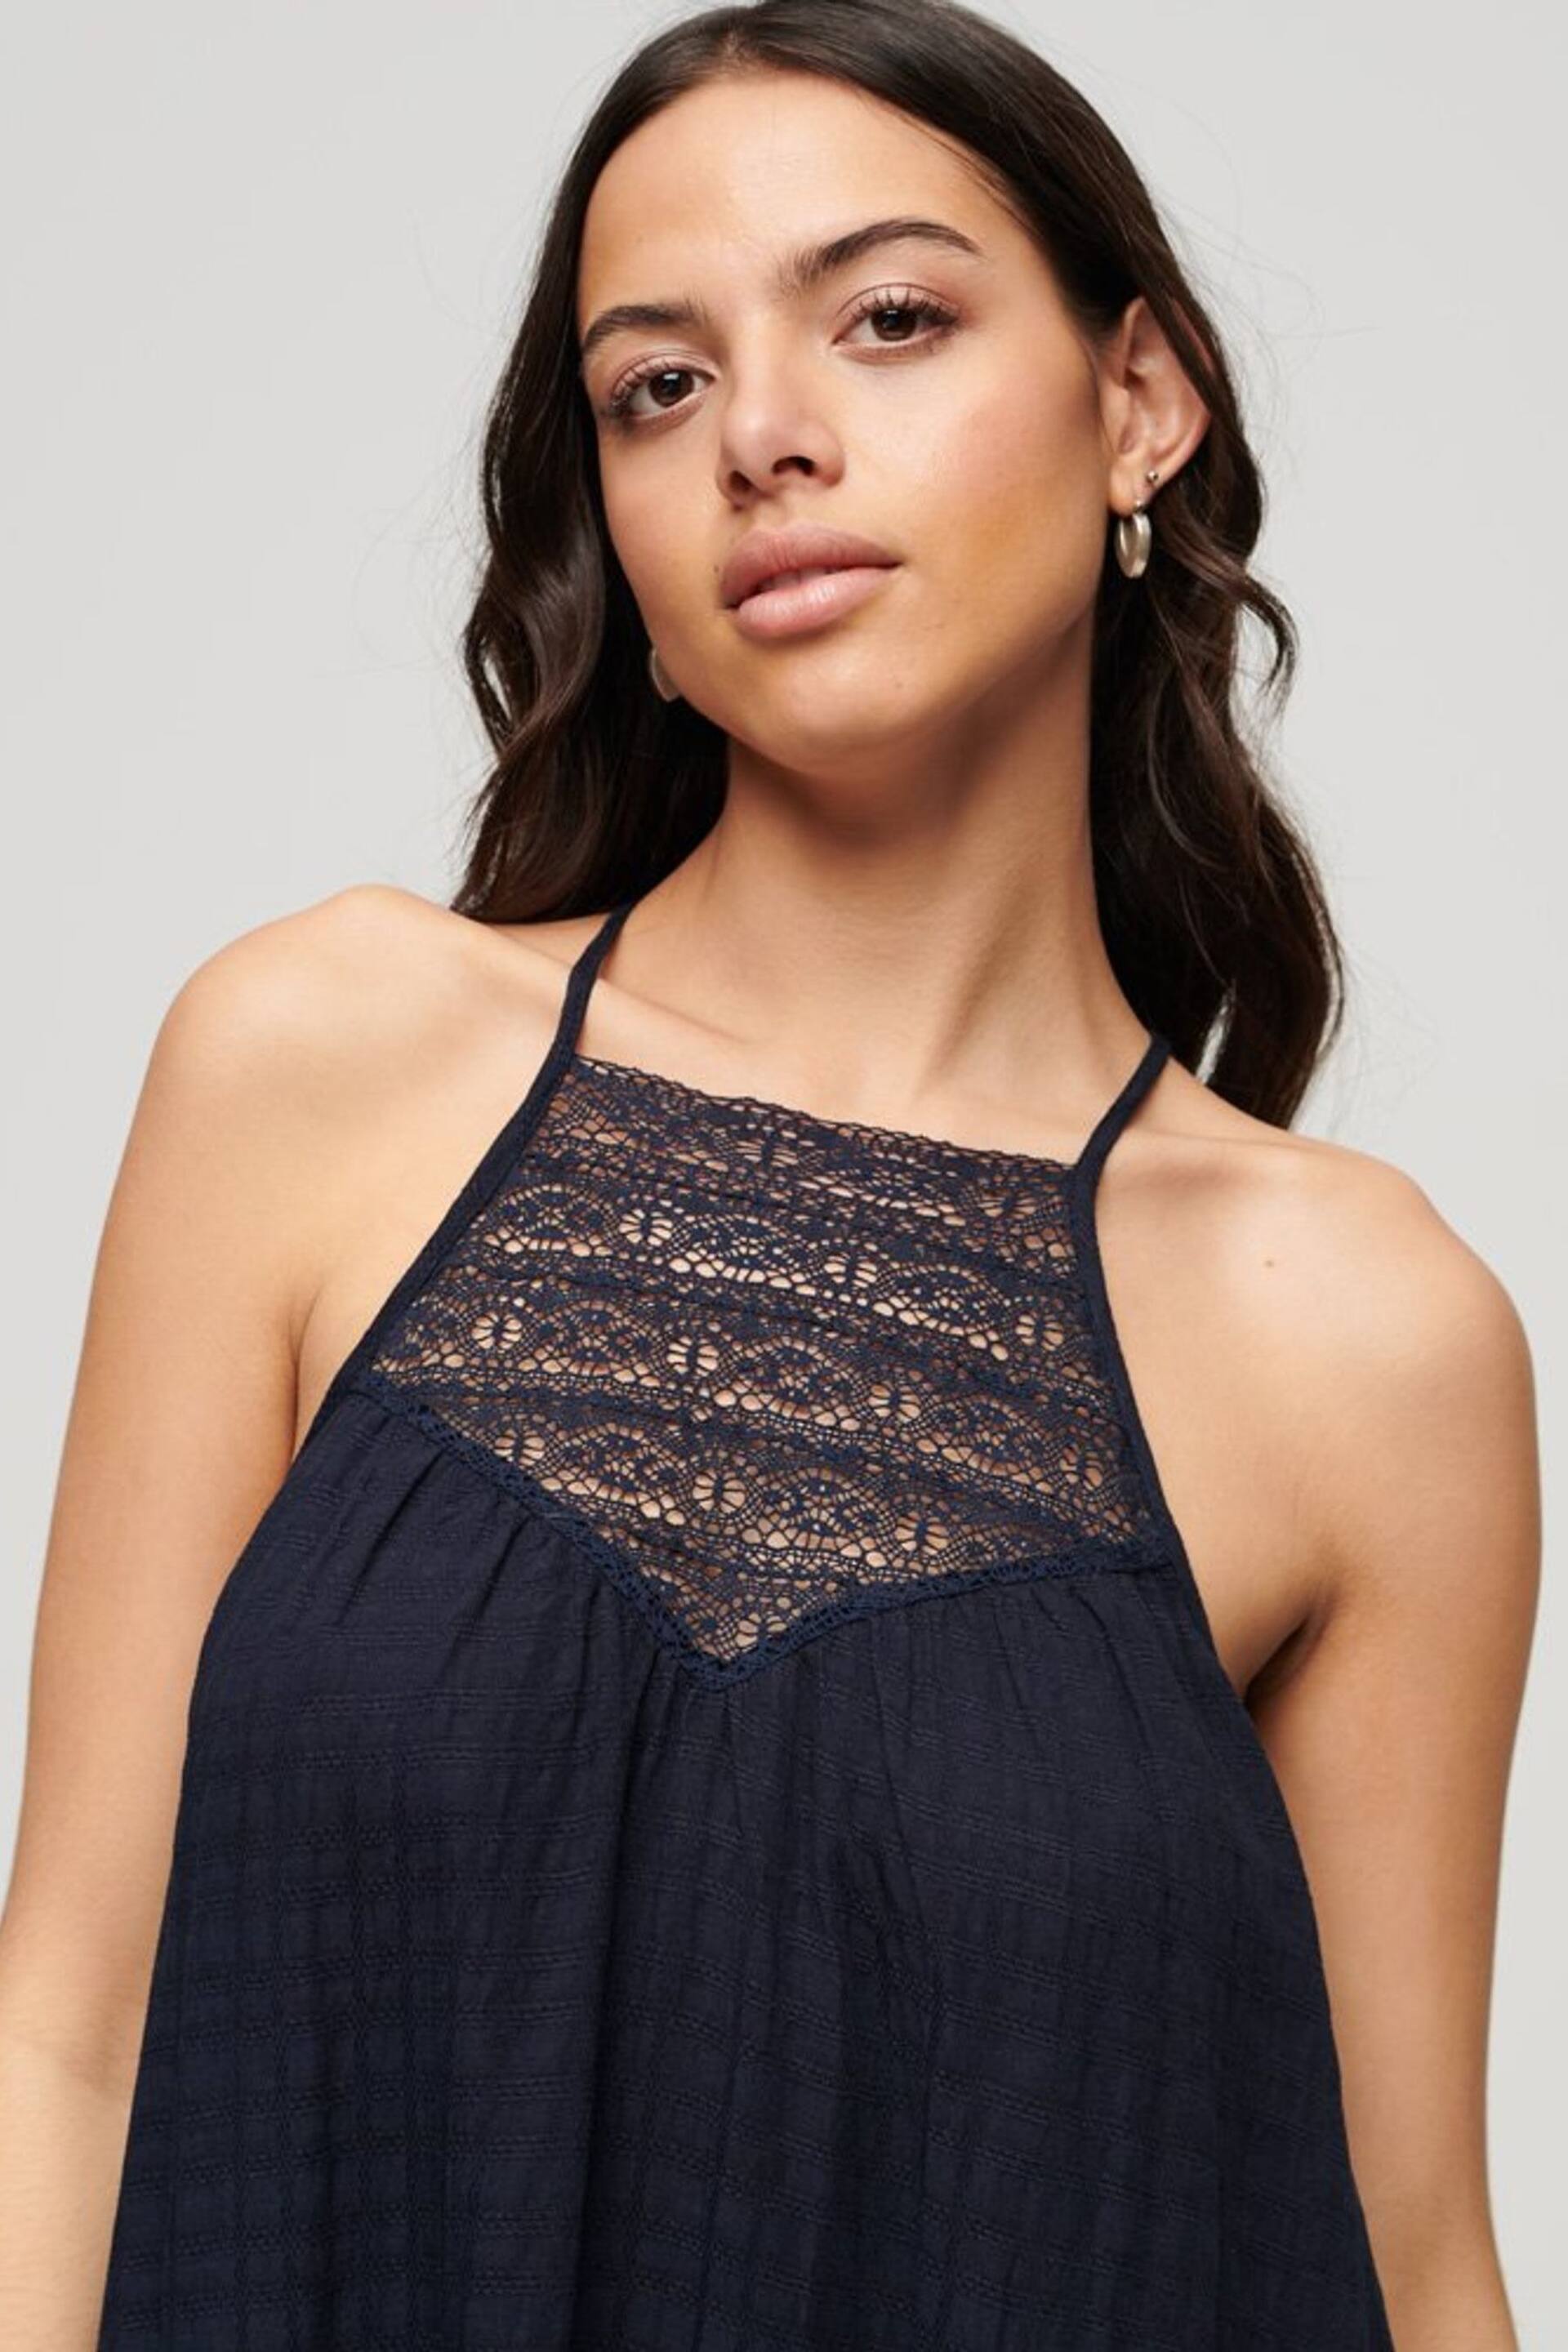 Superdry Blue Lace Halter Maxi Beach Dress - Image 2 of 5